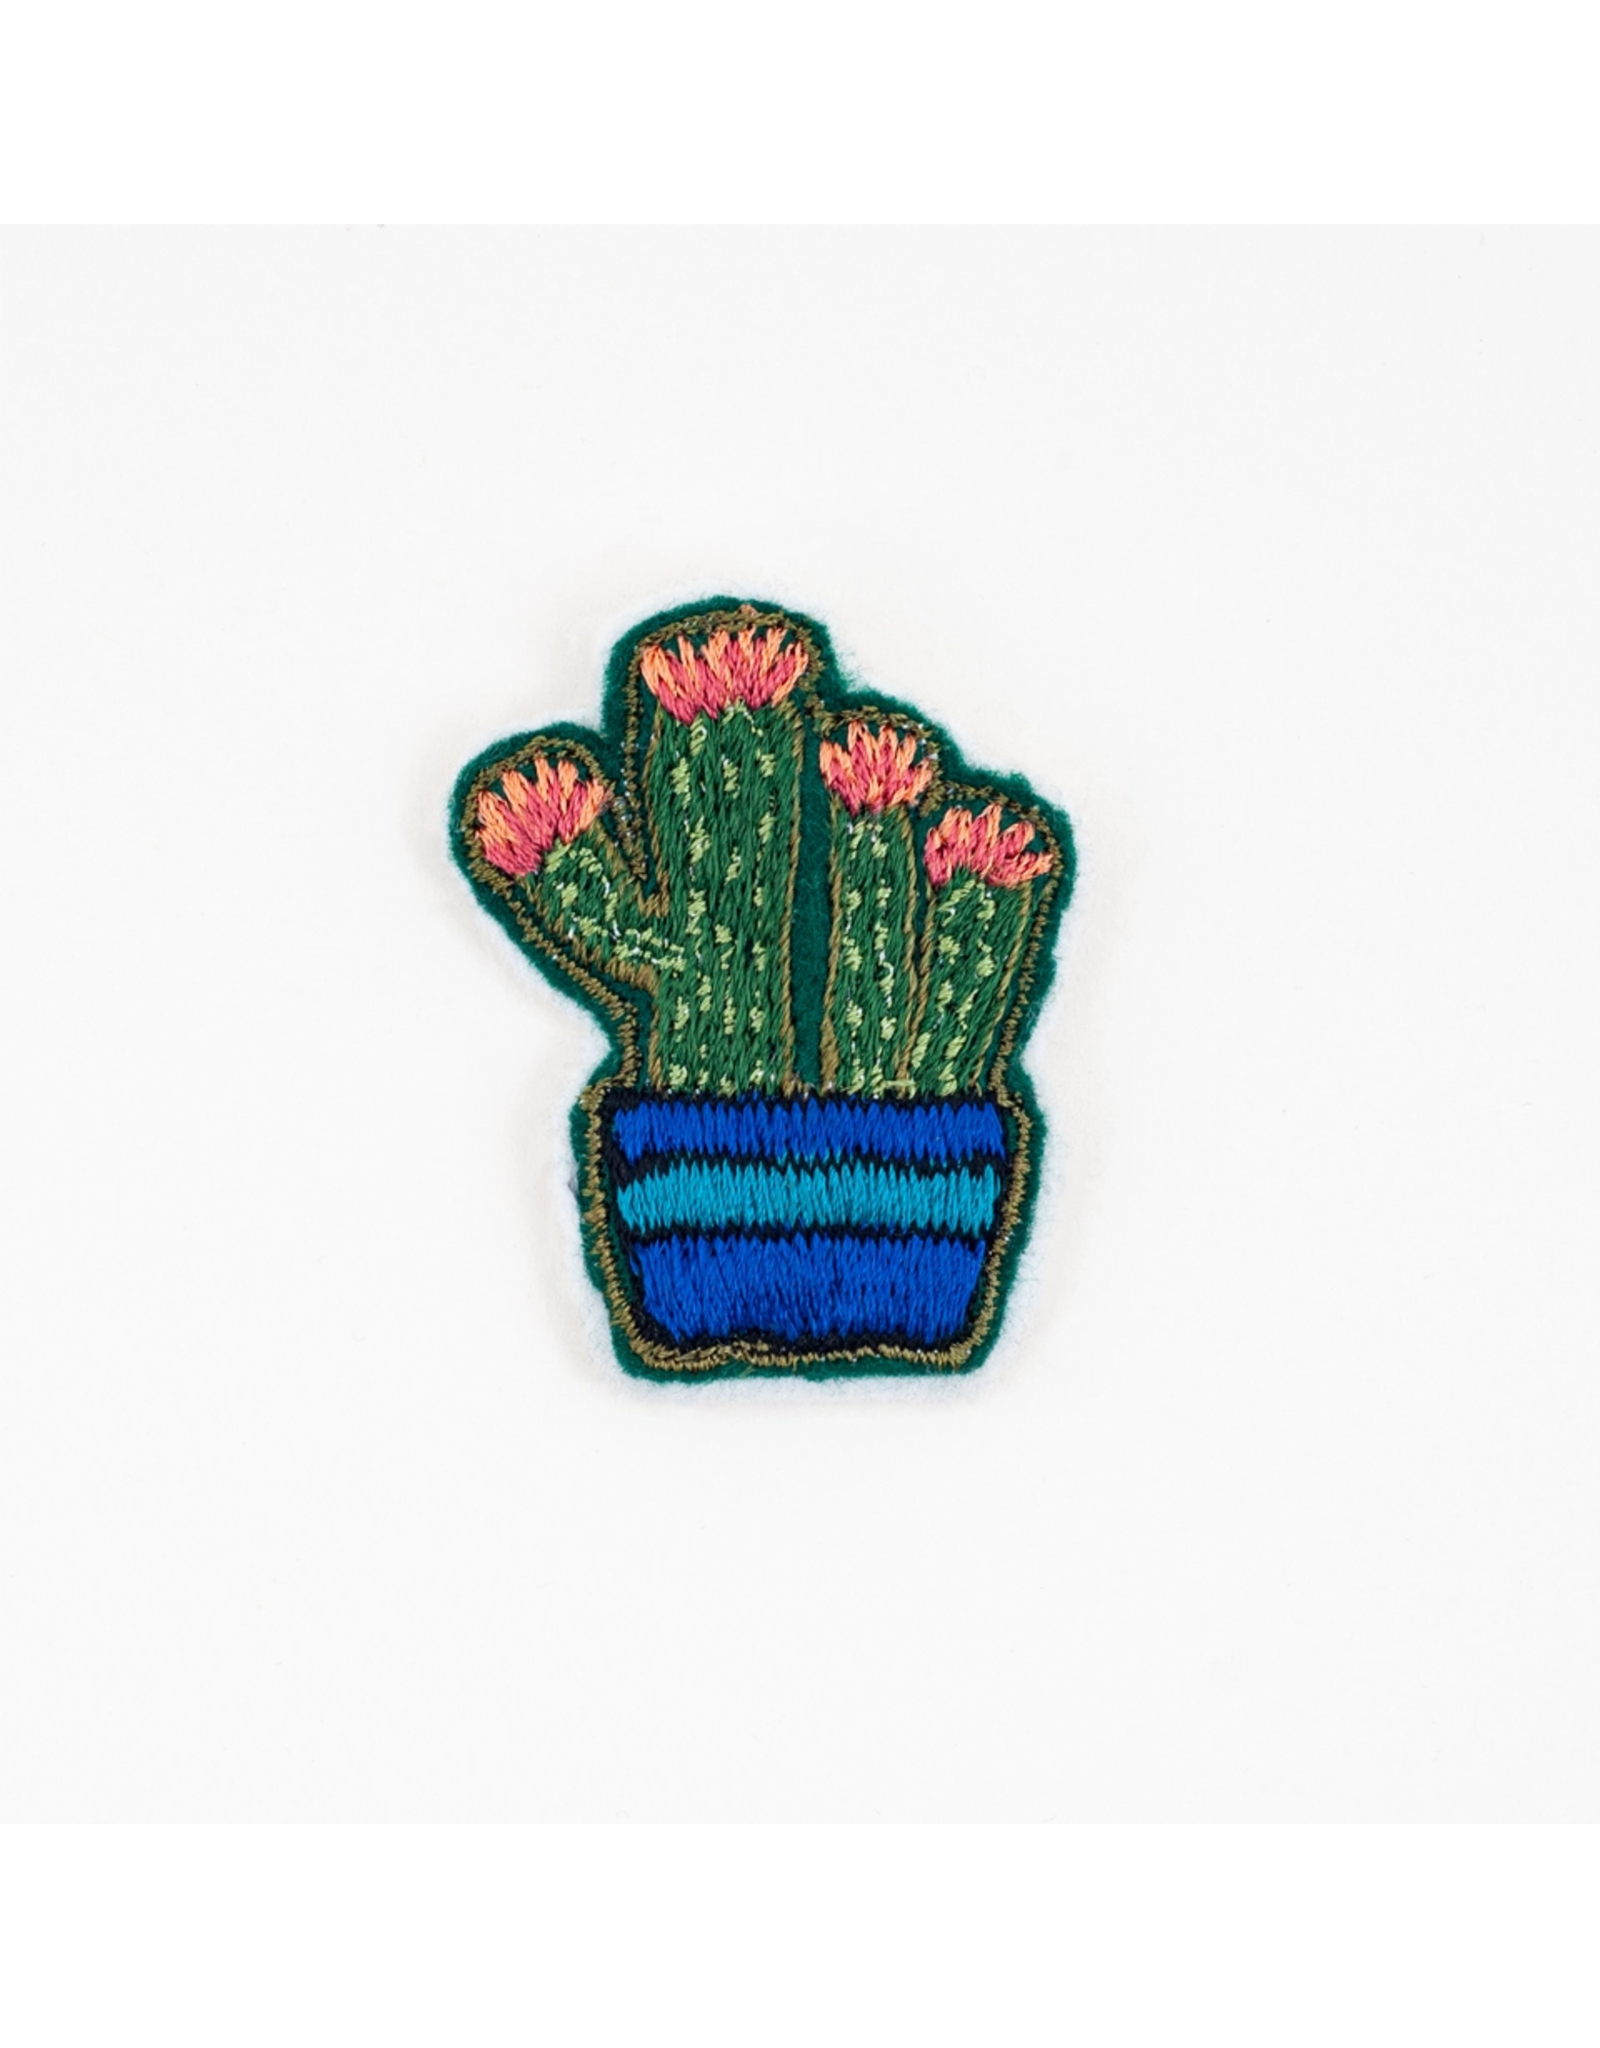 Trade roots Variety of Embroidered Pins, Guatemala